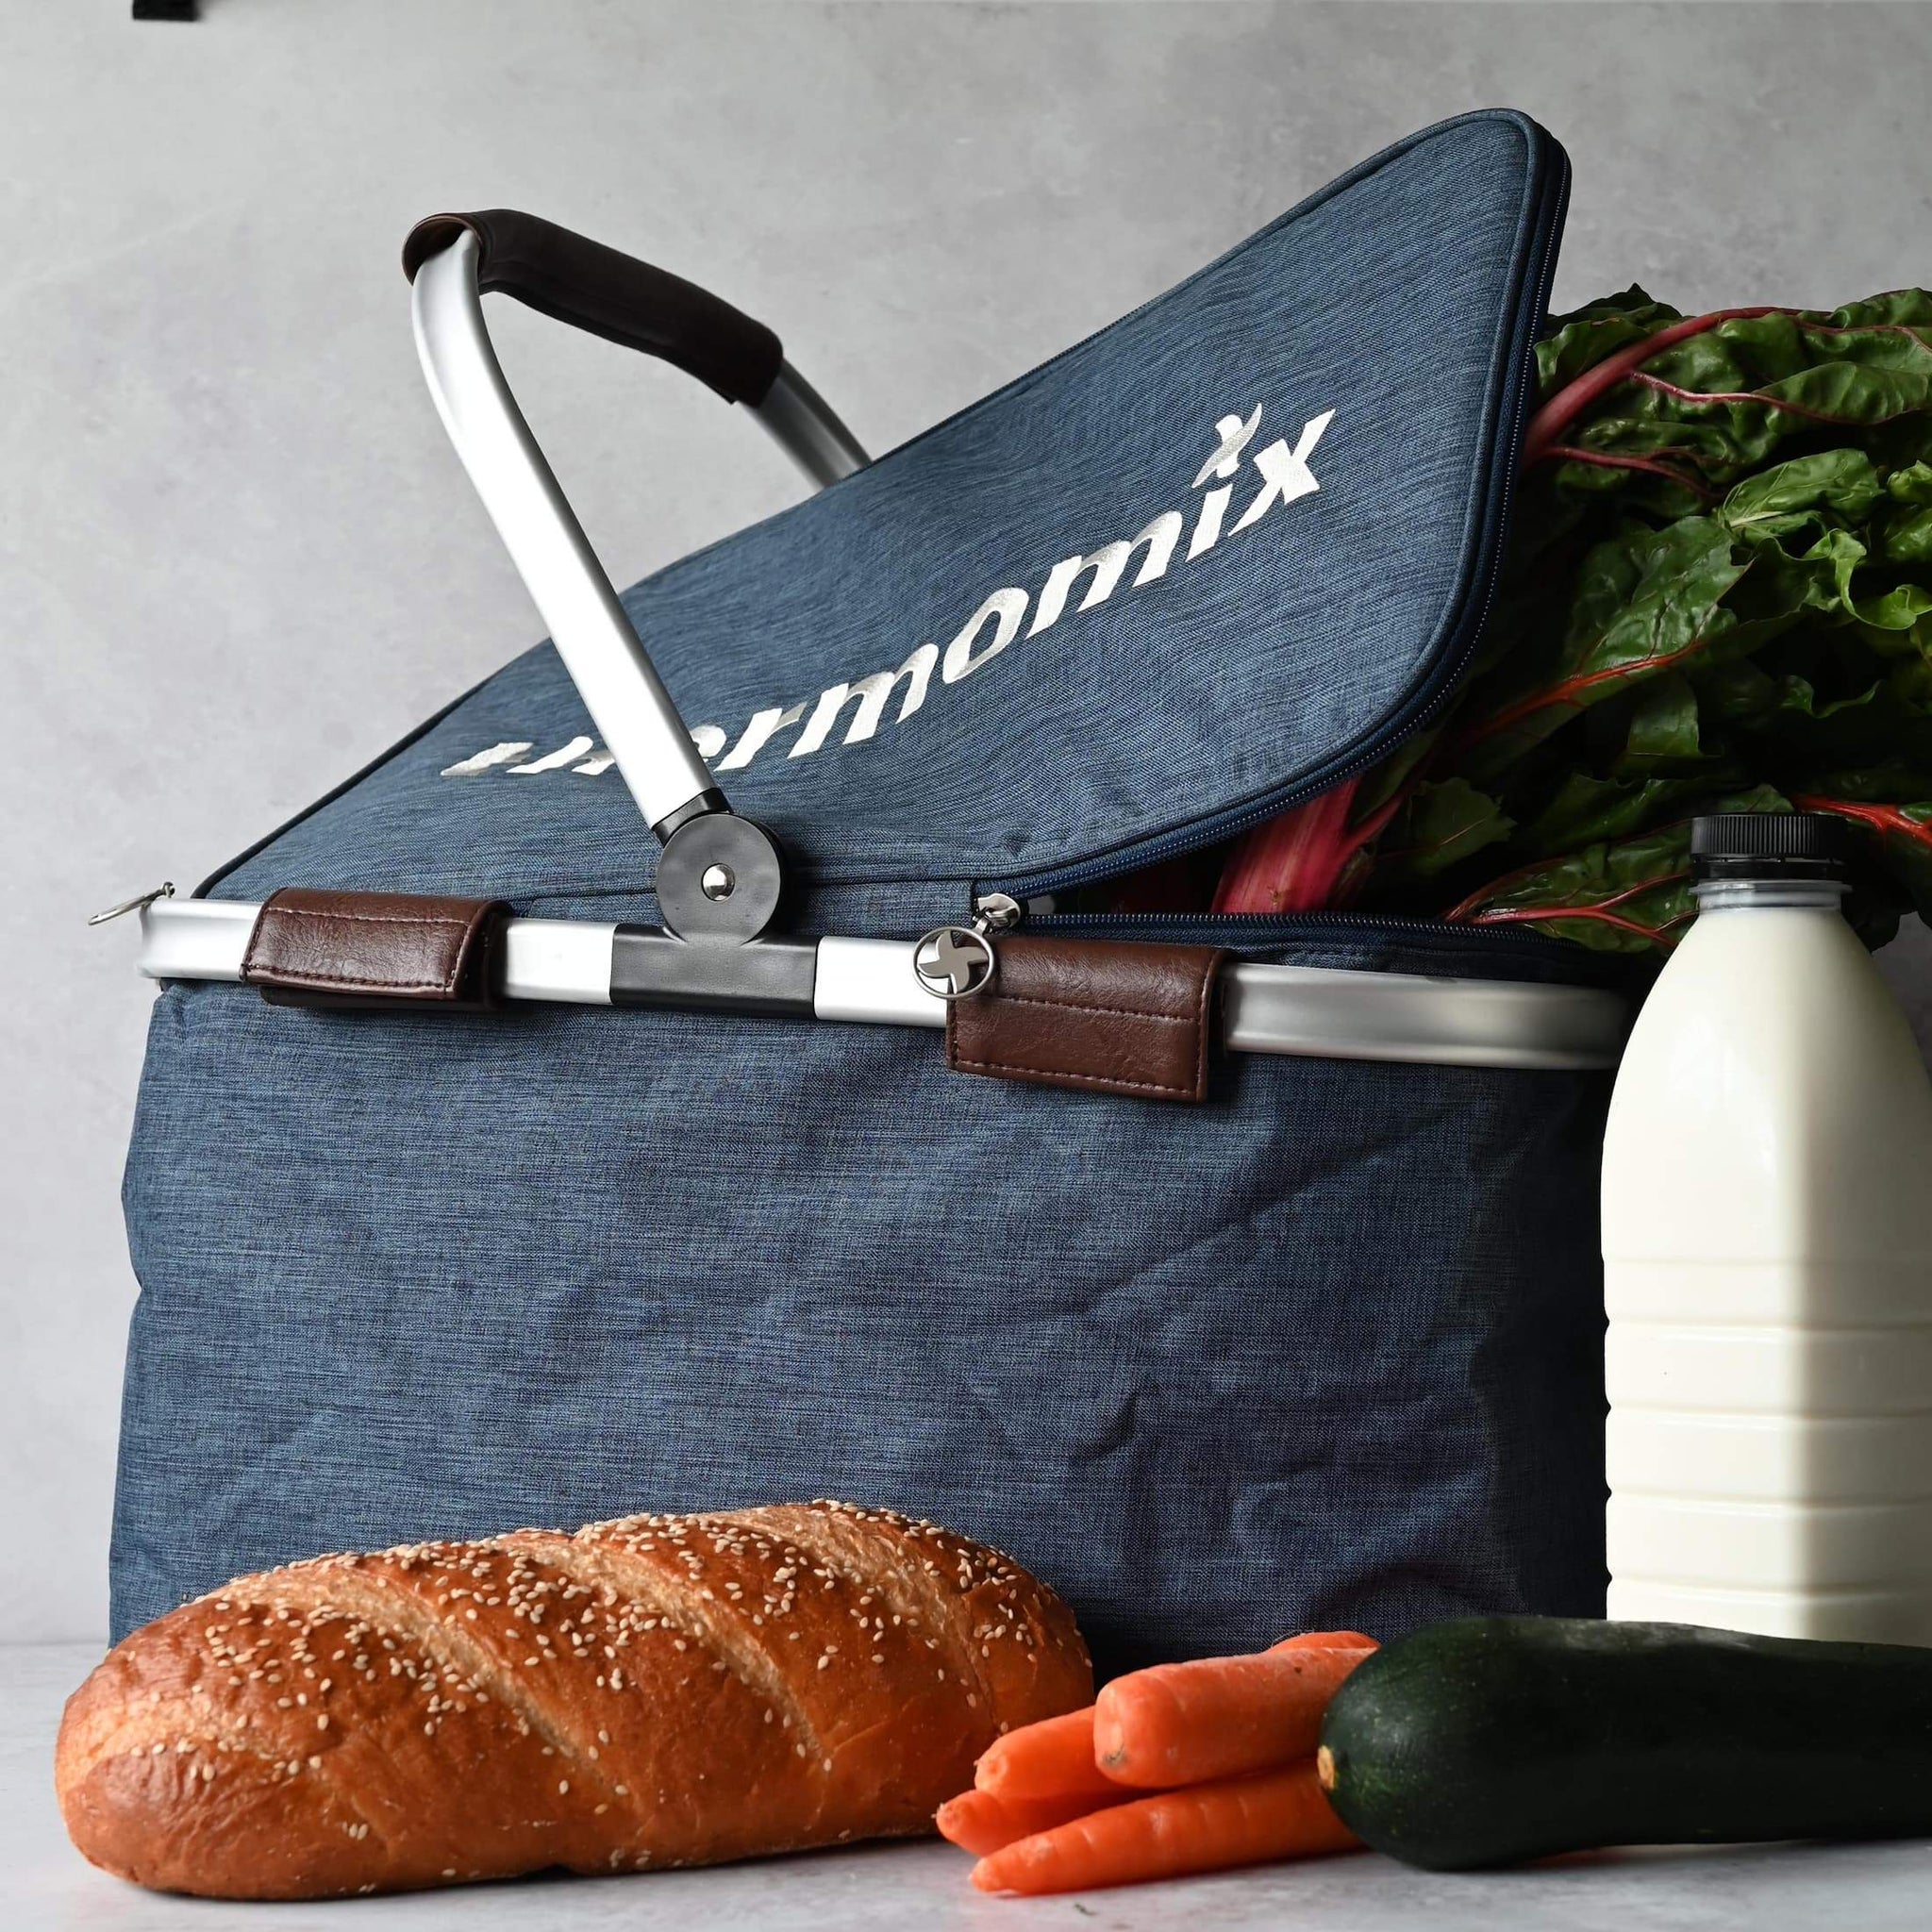 Thermomix® Storage Insulated Carry Basket